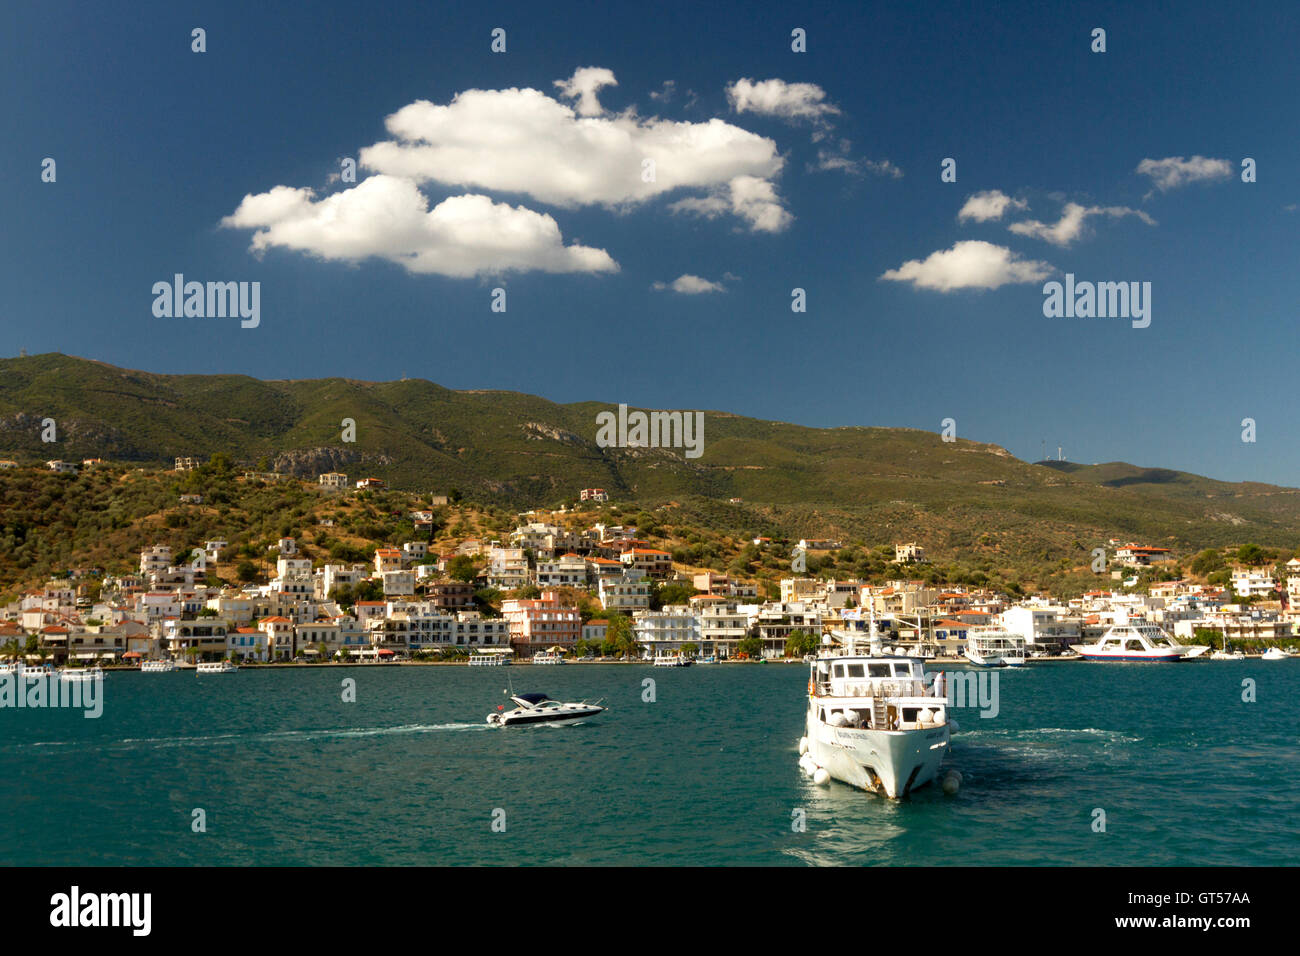 The town of Galatas, as seen from Poros island, Greece. The strait between Galatas and the island is about 2 minutes long to cross on boat. Stock Photo